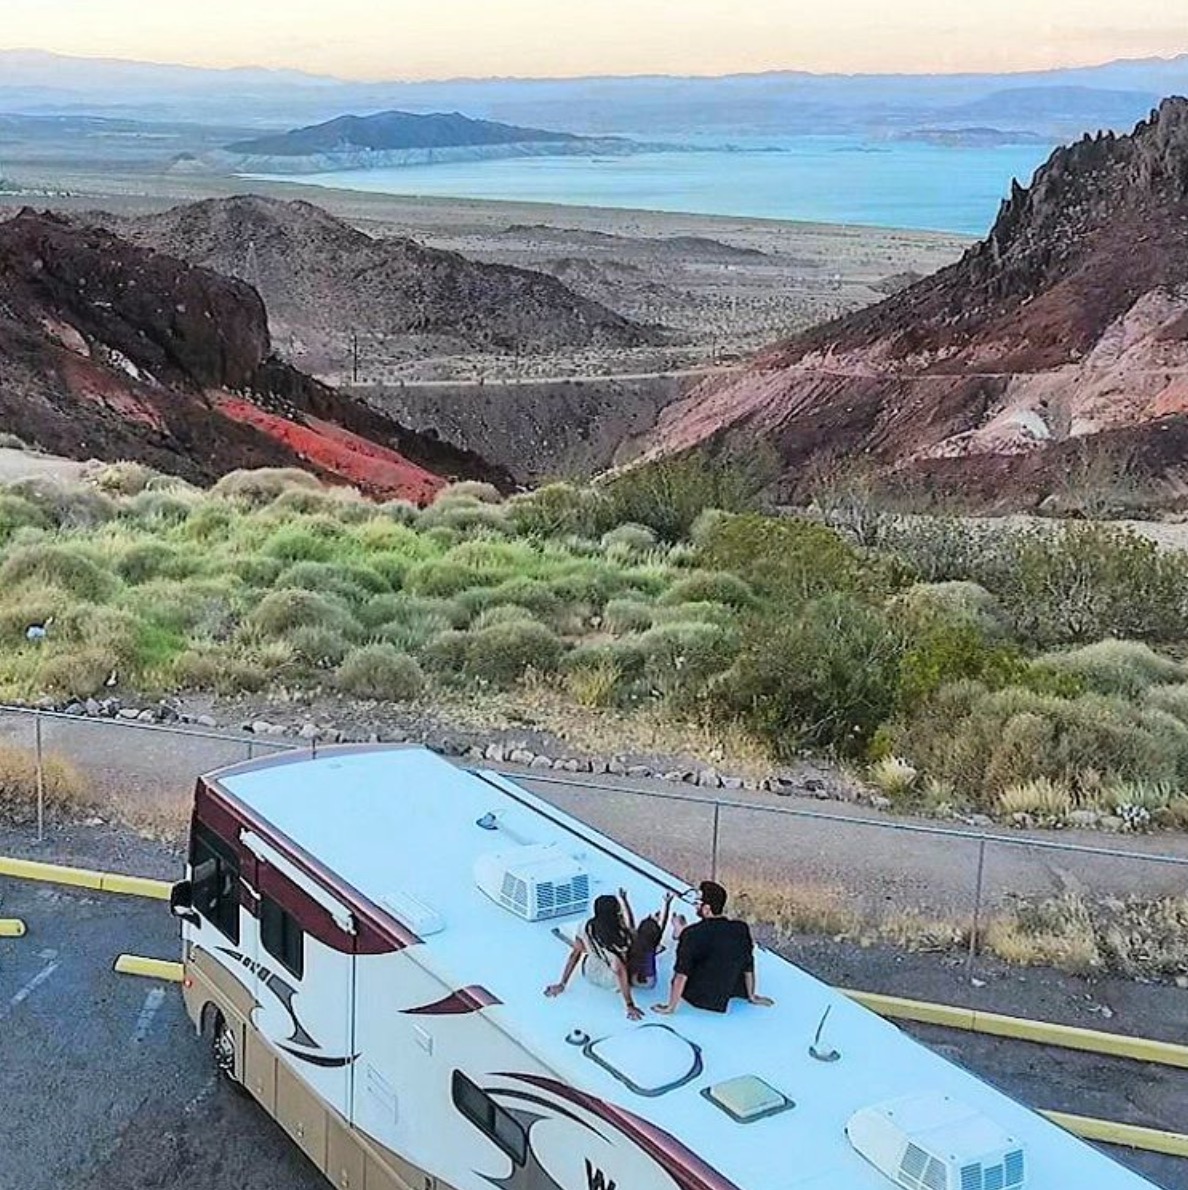 Couple sitting on their motorhome looking out over landscape and water ahead.